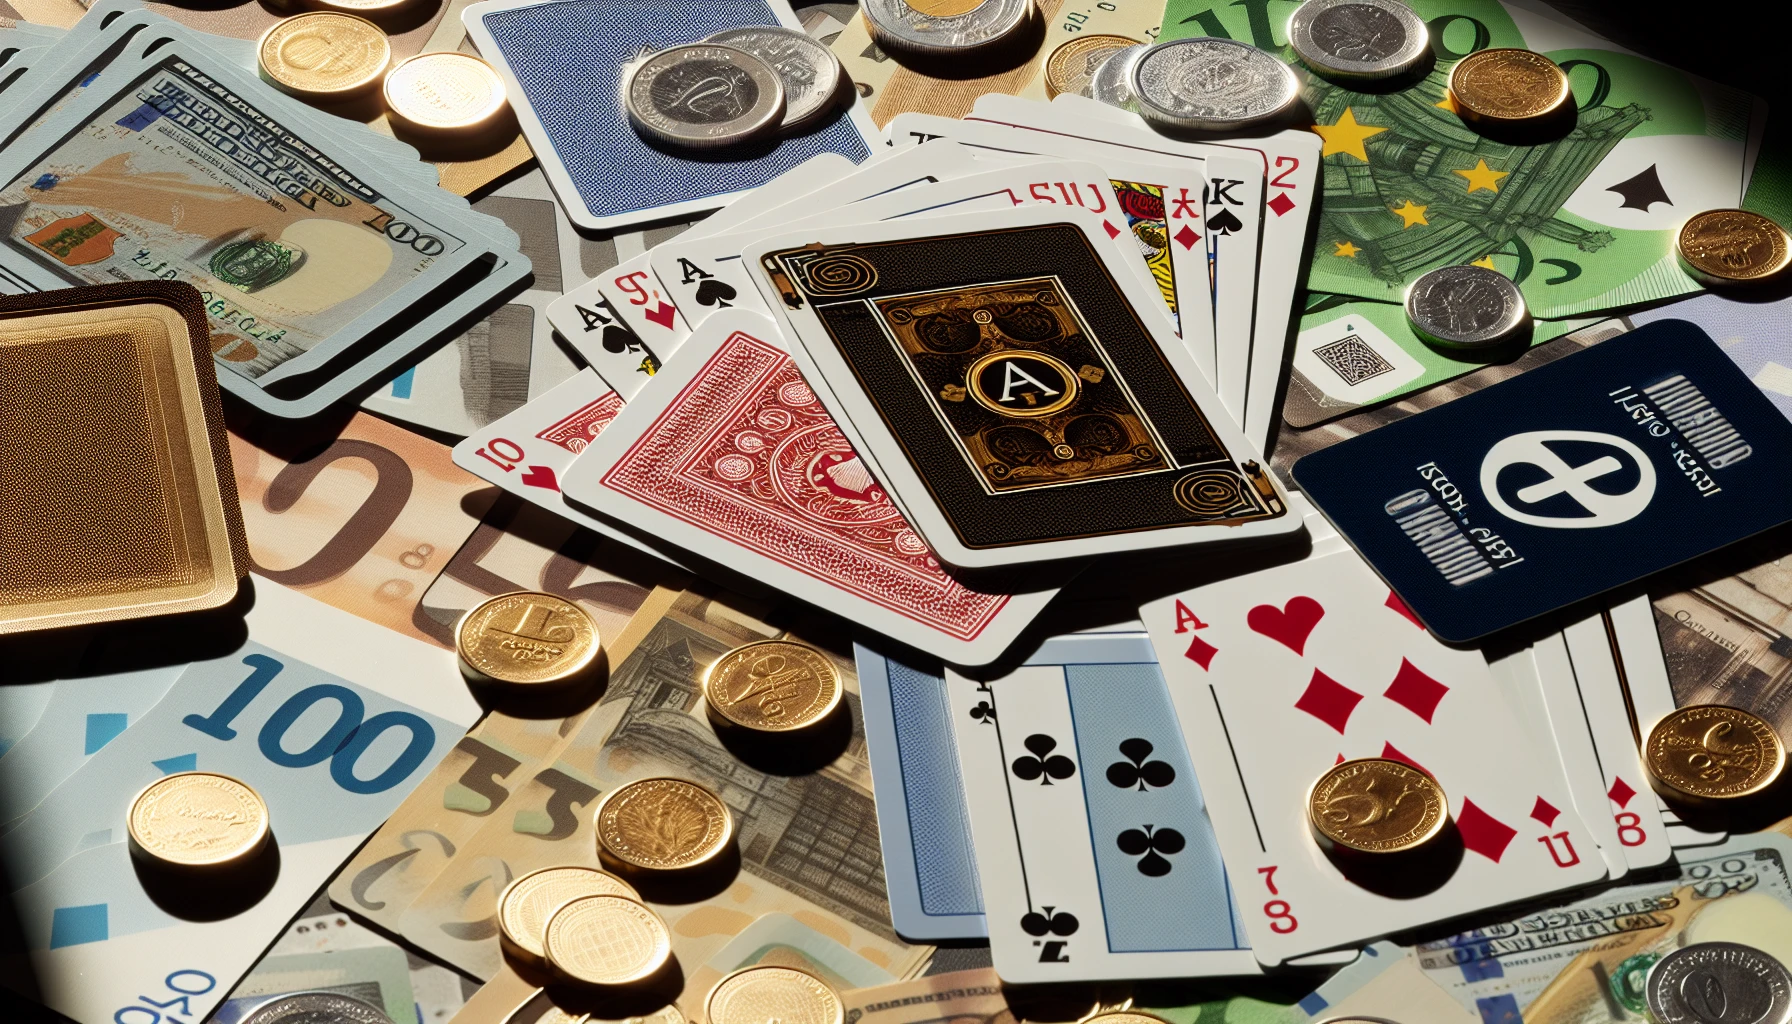 Classic and modern card games with real money rewards